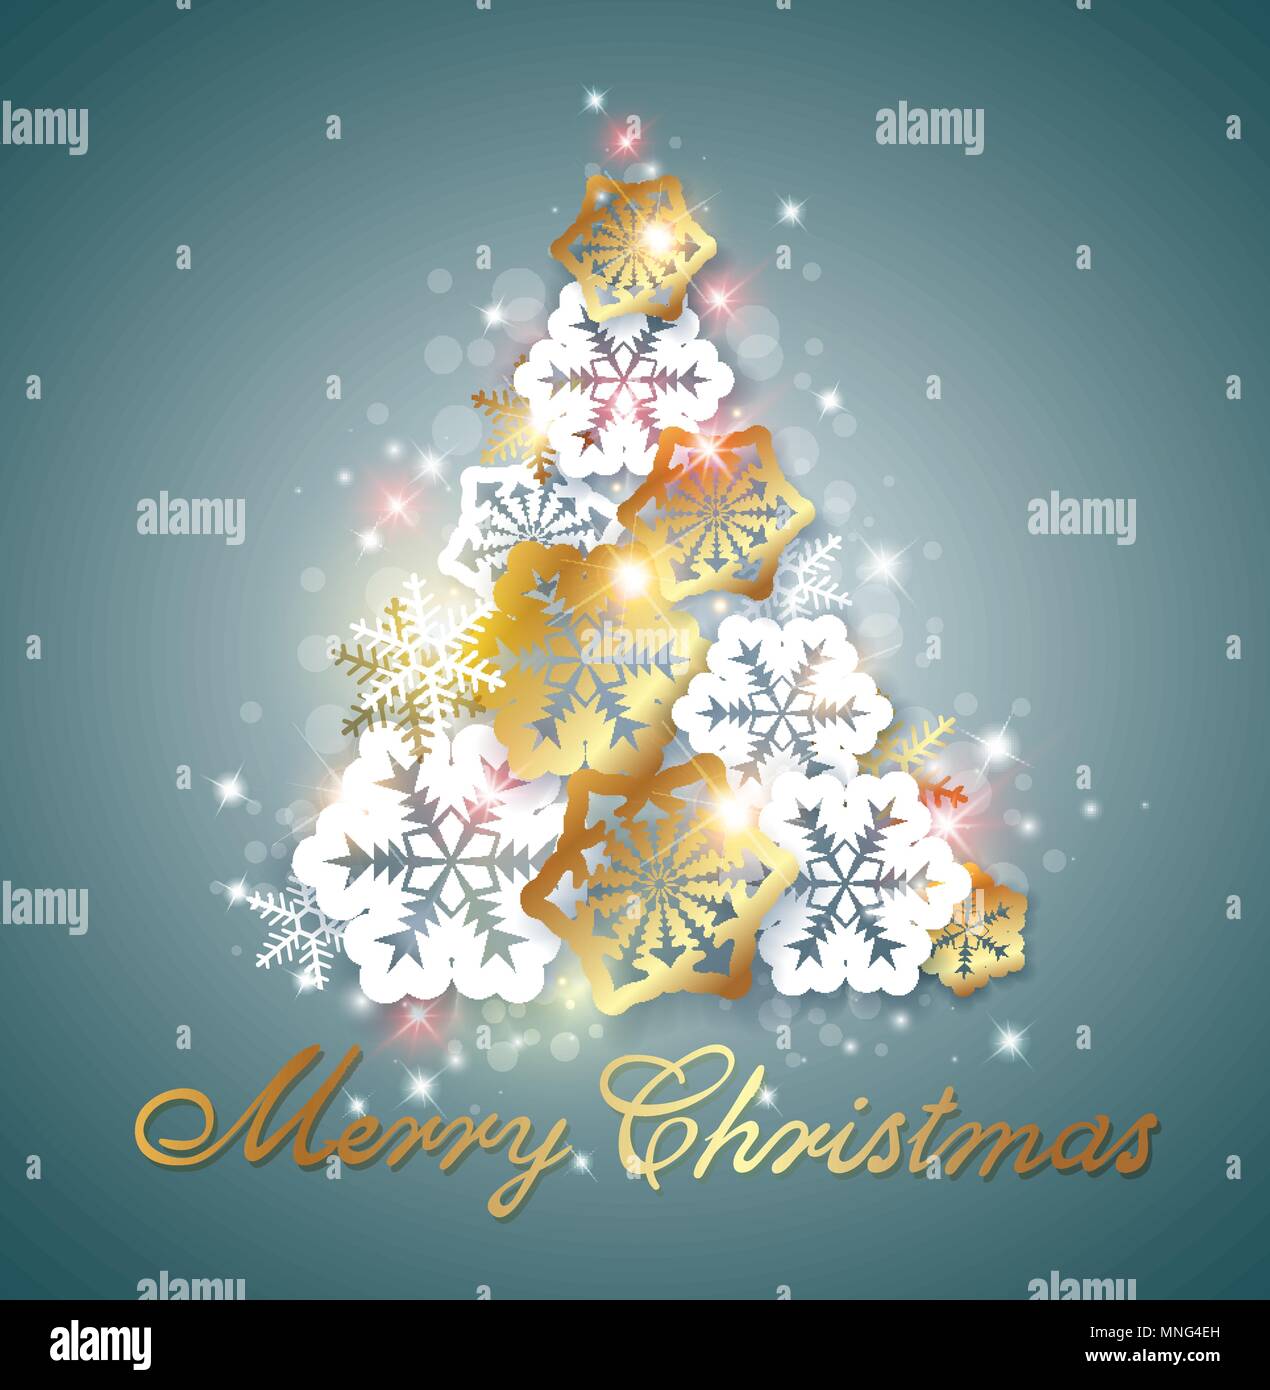 Green Christmas background with golden and white snowflakes. Decorative Christmas tree from snowflakes. Stock Vector